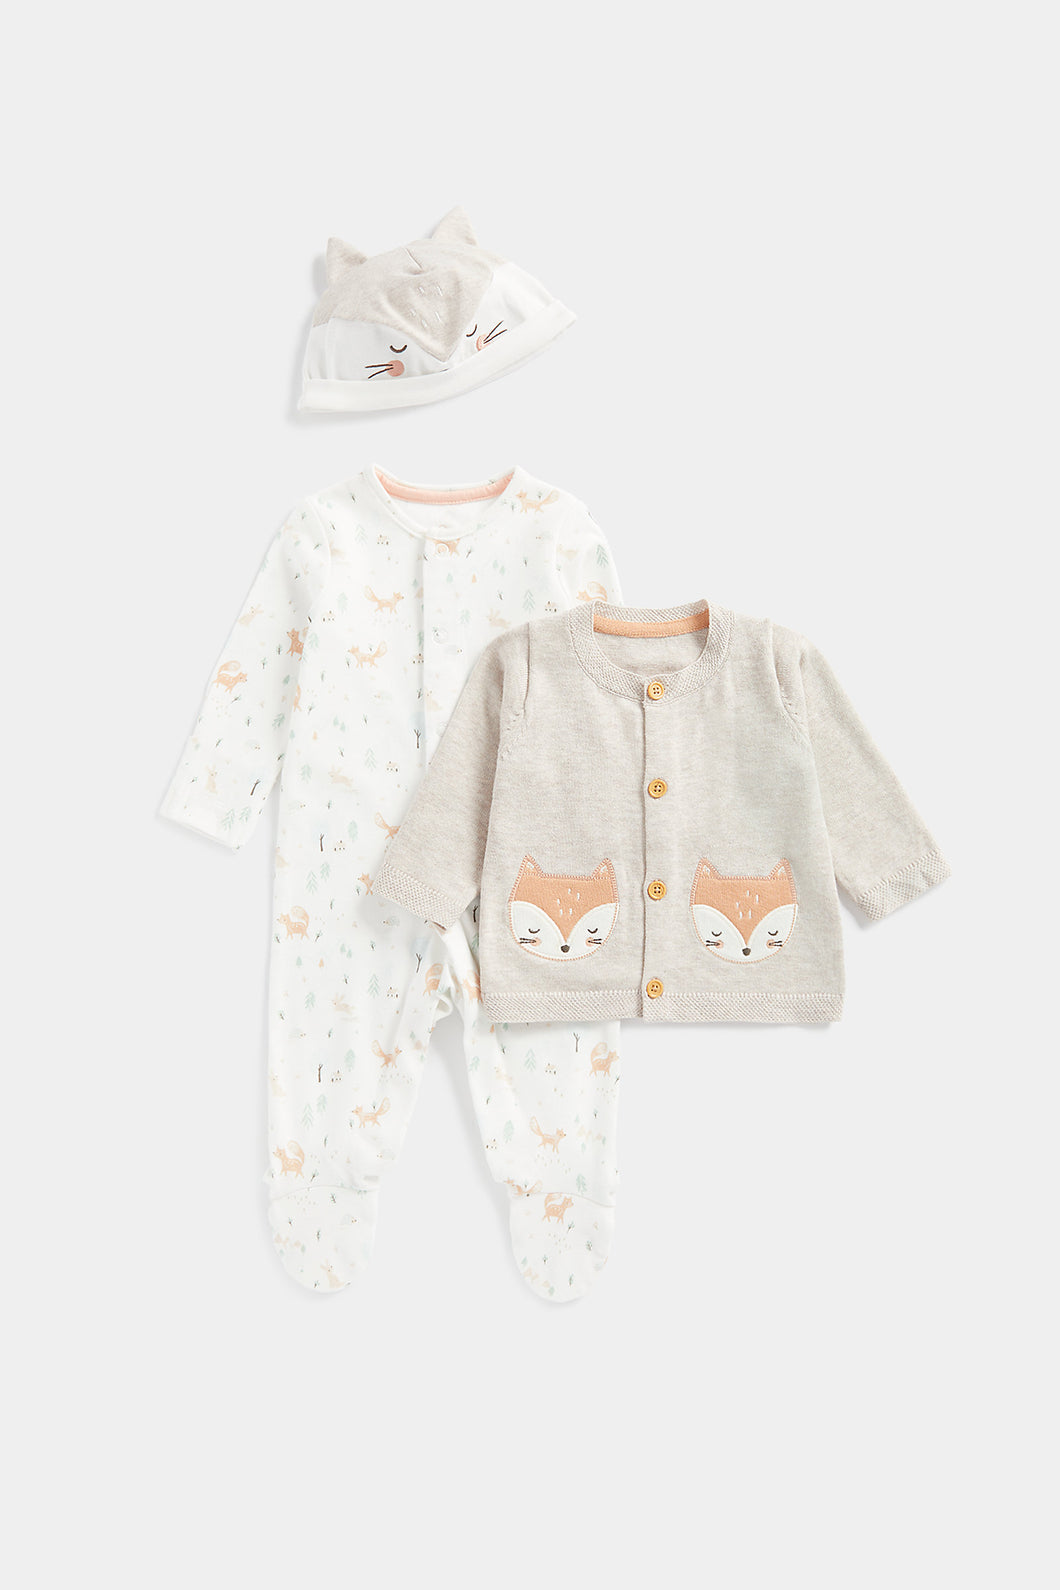 Mothercare My First 3-Piece Baby Outfit Set